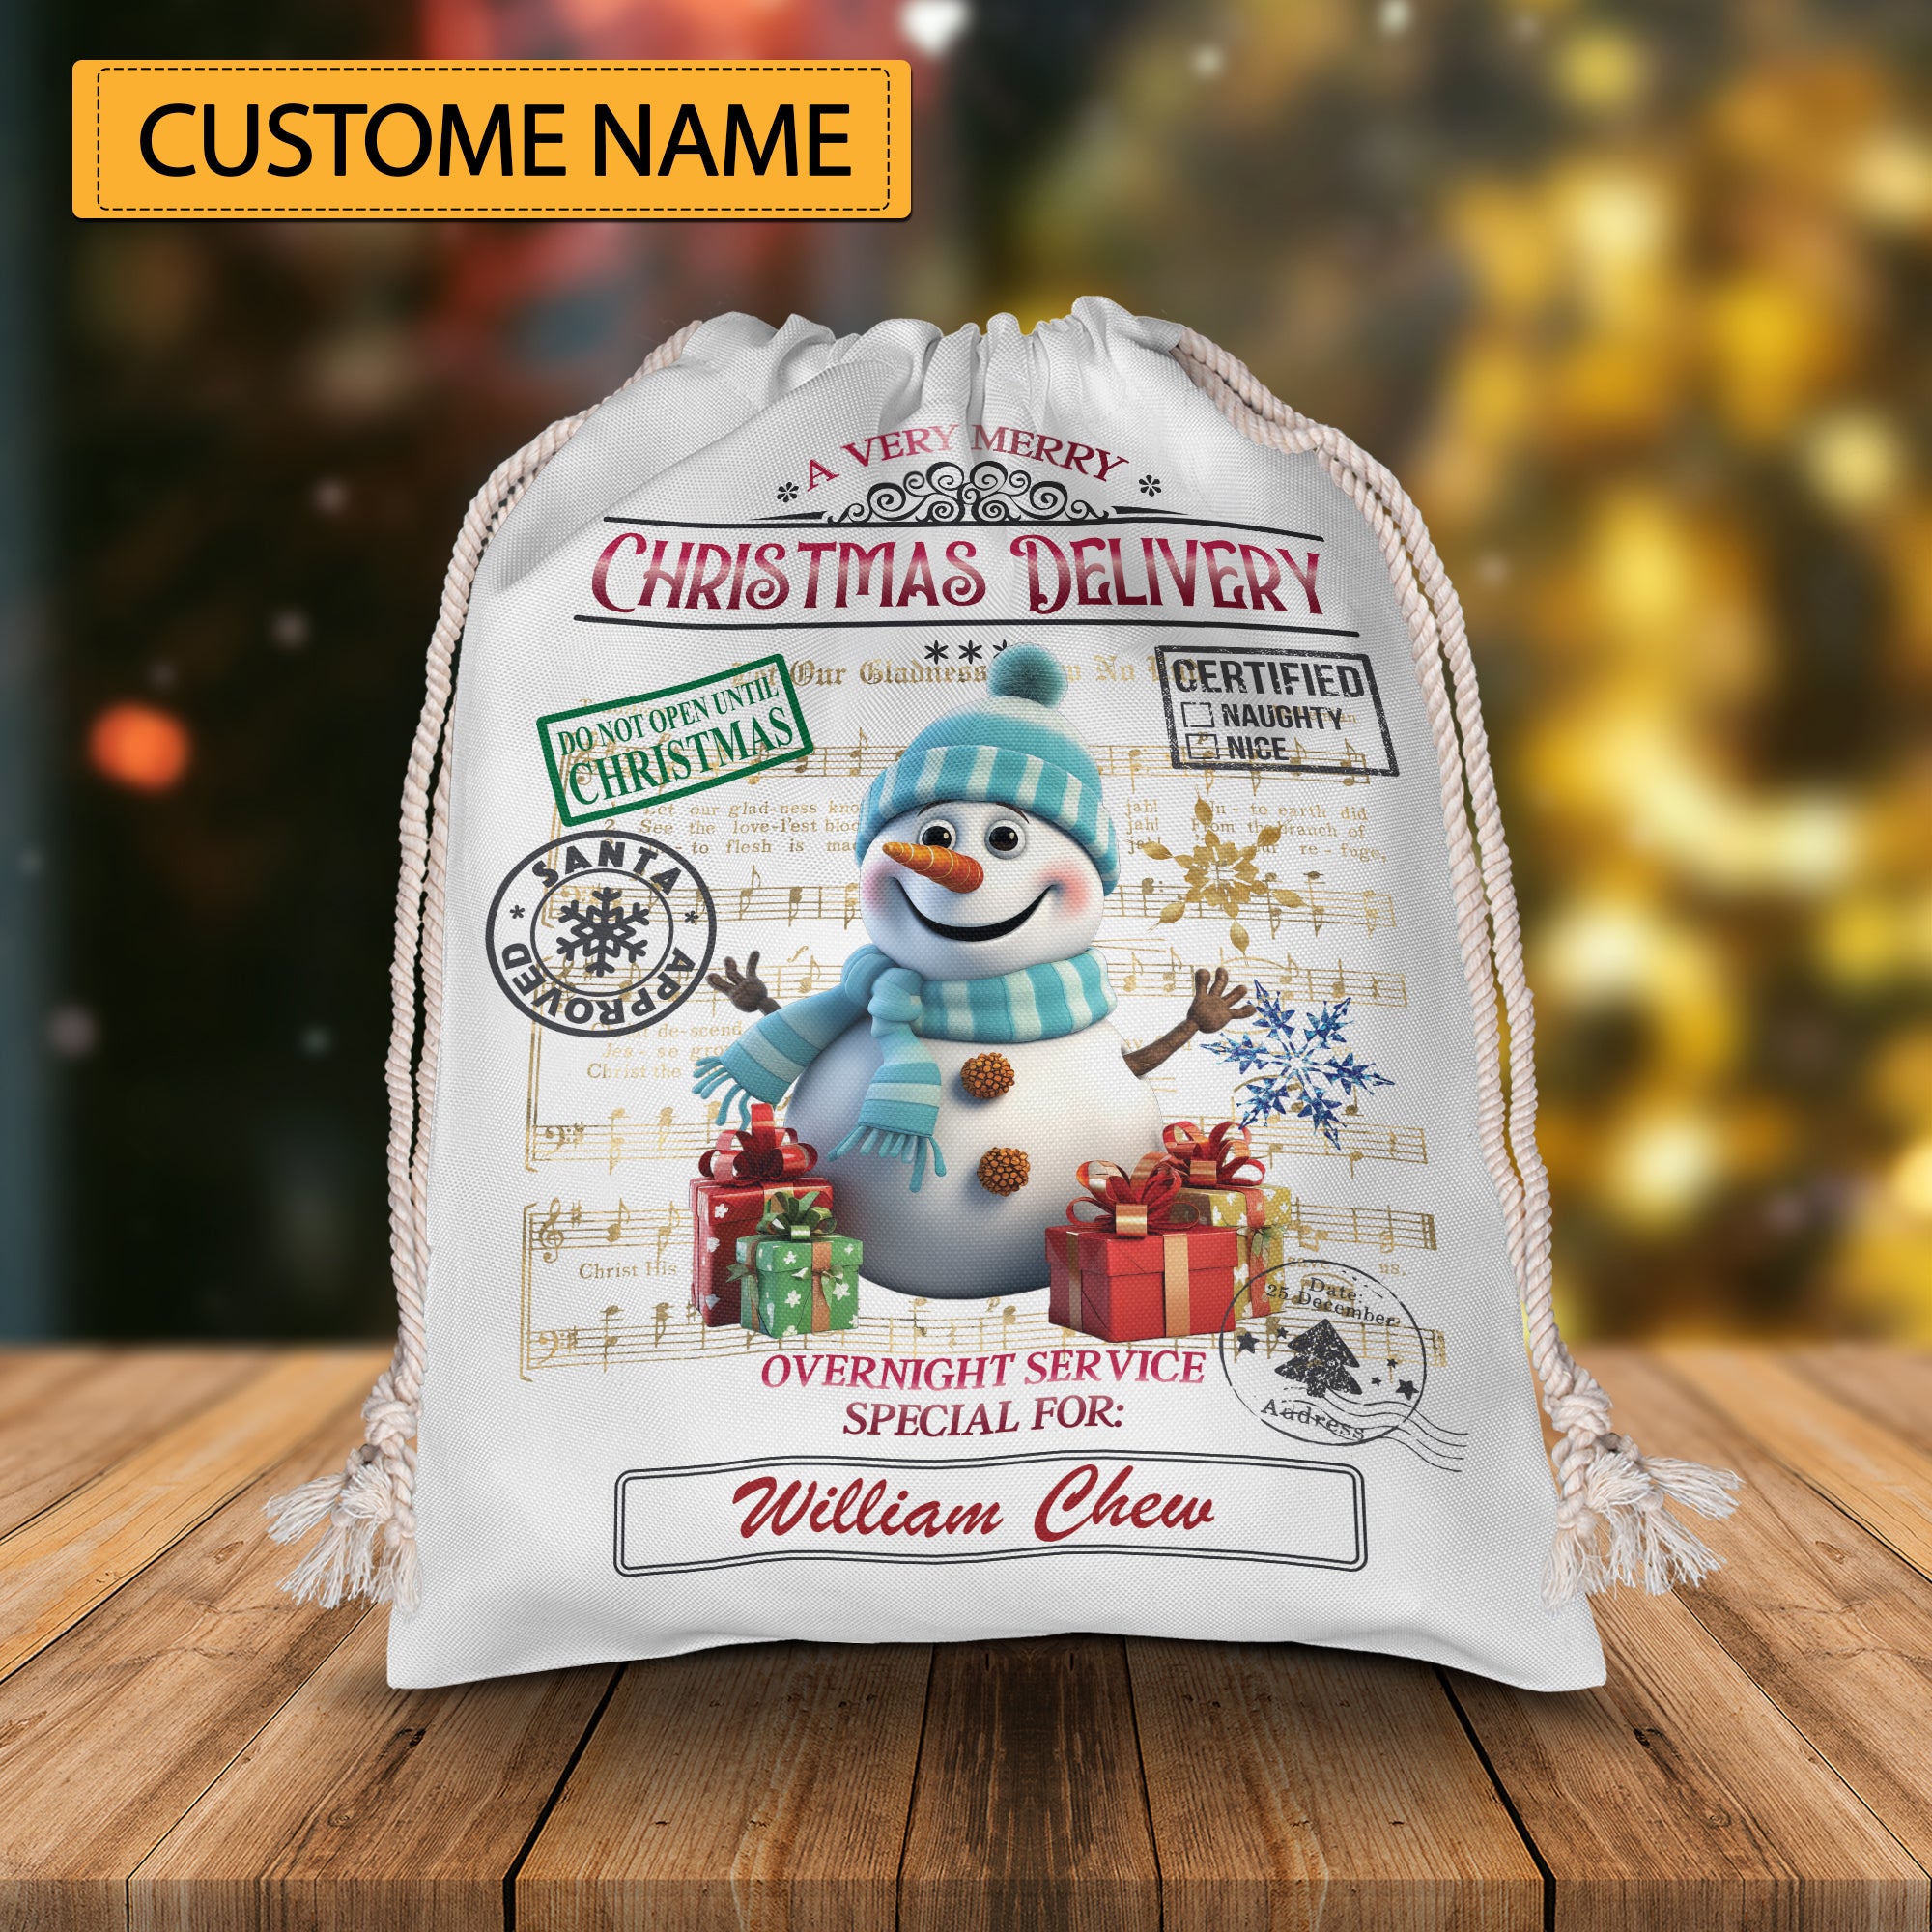 A Very Merry Christmas Delivery Overnight Service - Personalized String Bag, Christmas Gift, Gift For Family